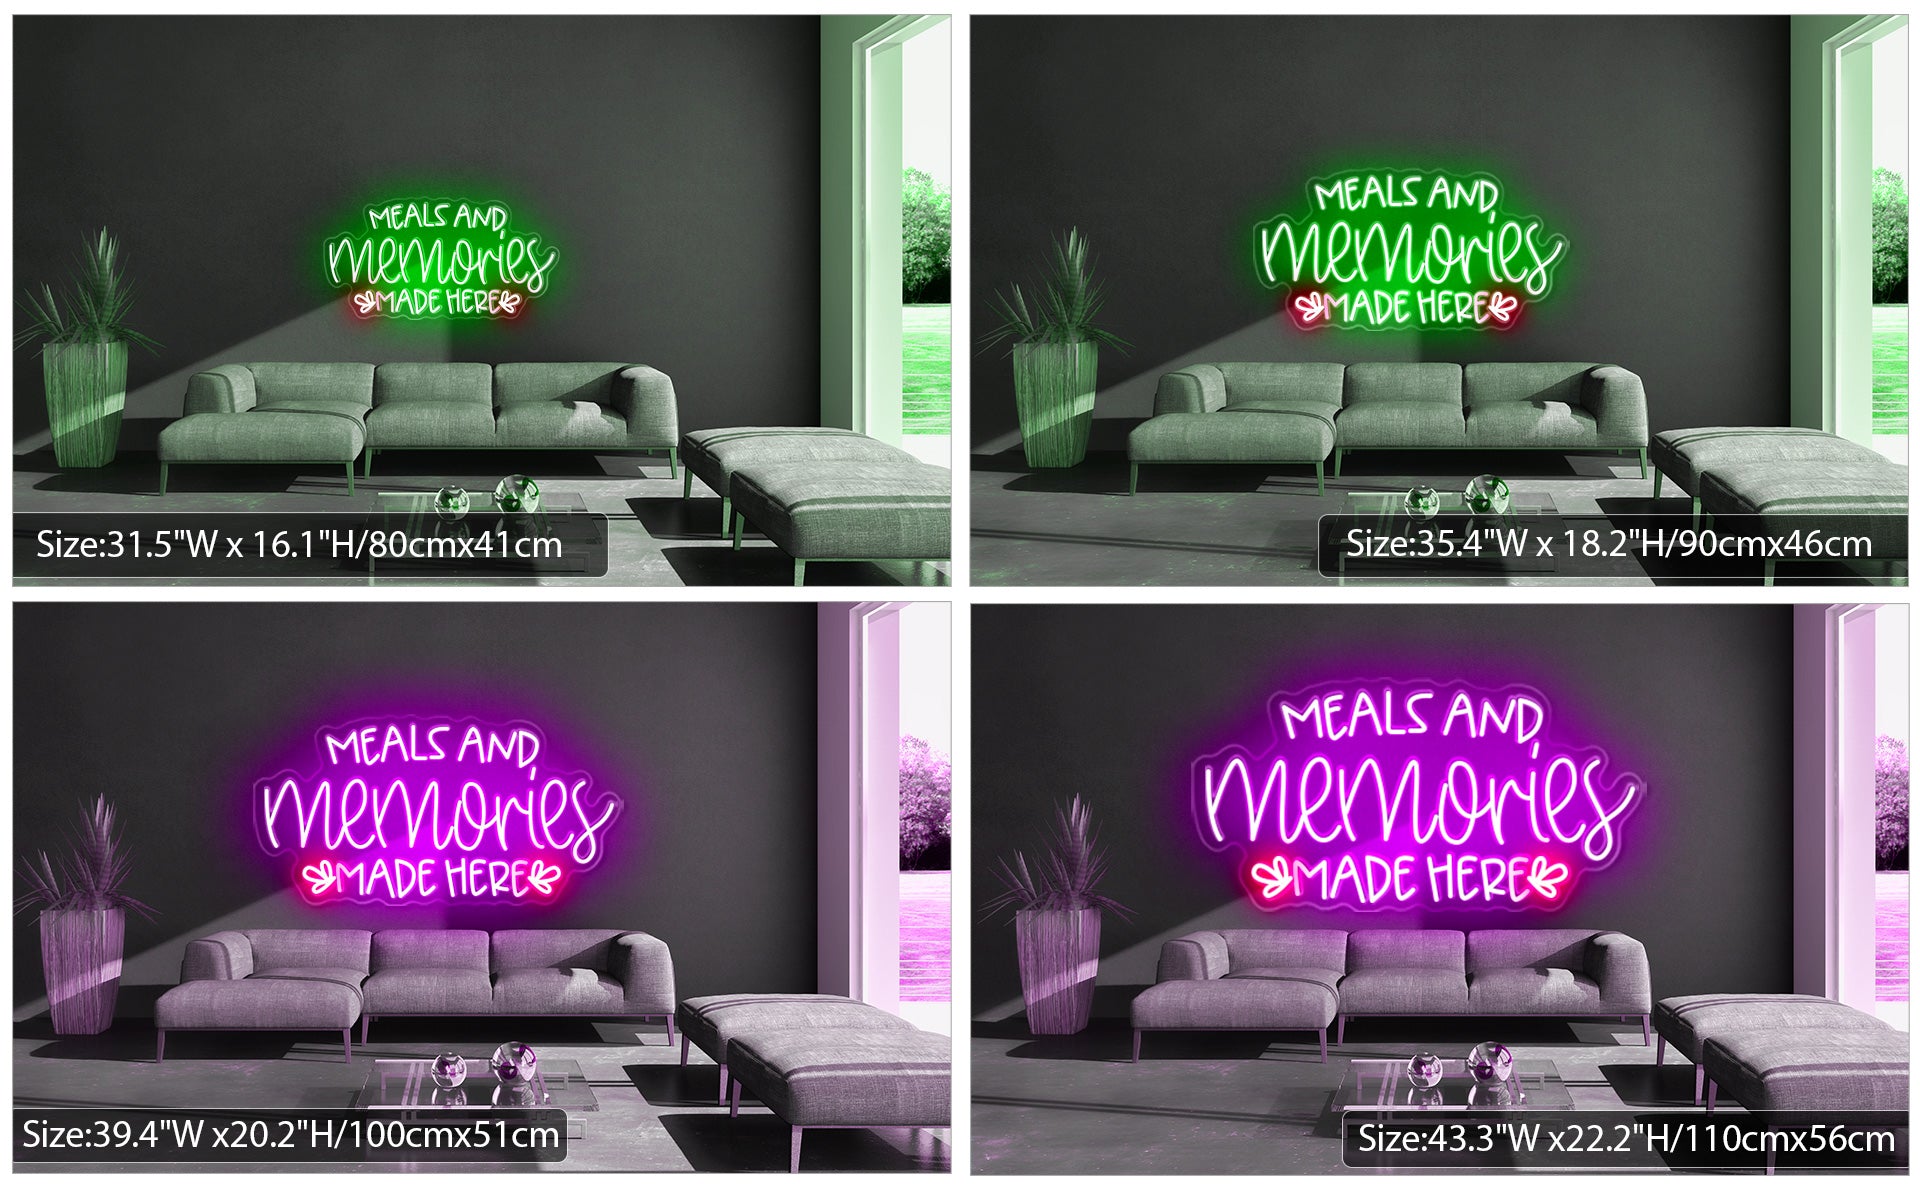 Meals and Memories Made Here LED Neon Sign